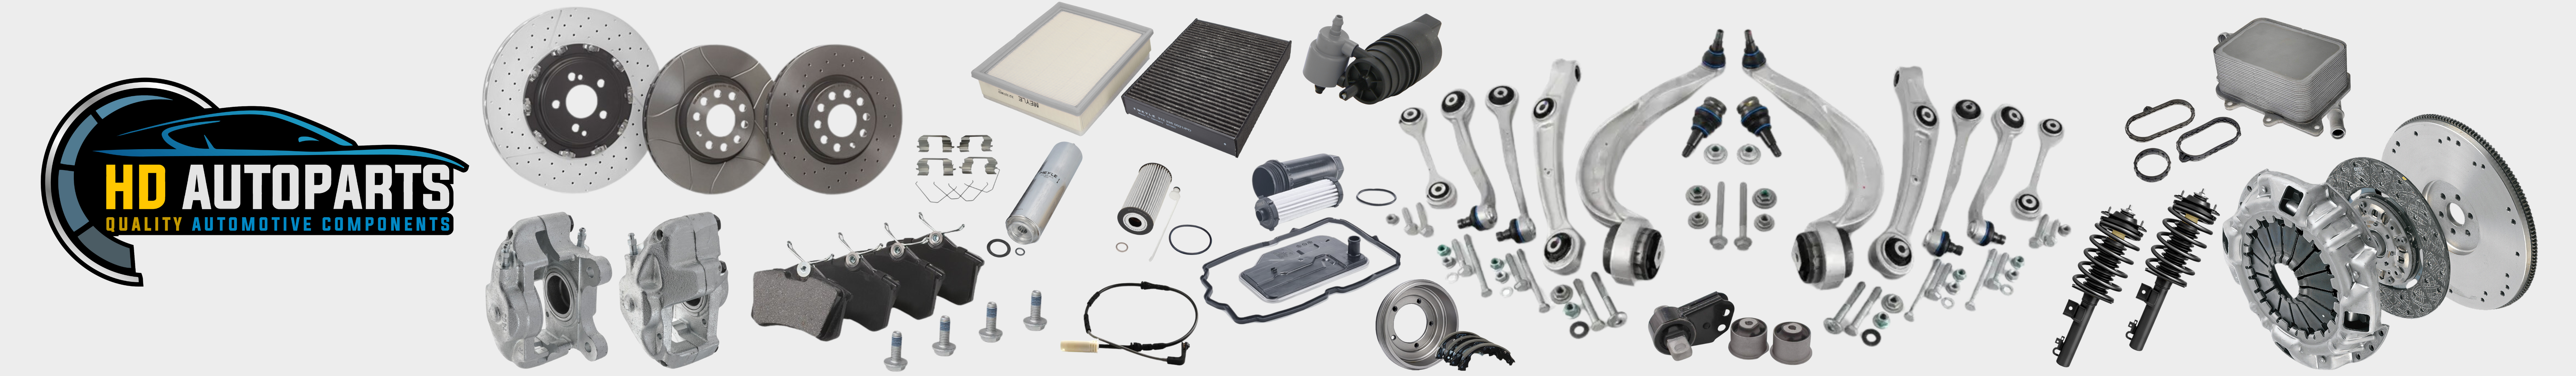 Quality Branded Parts at Affordable Prices